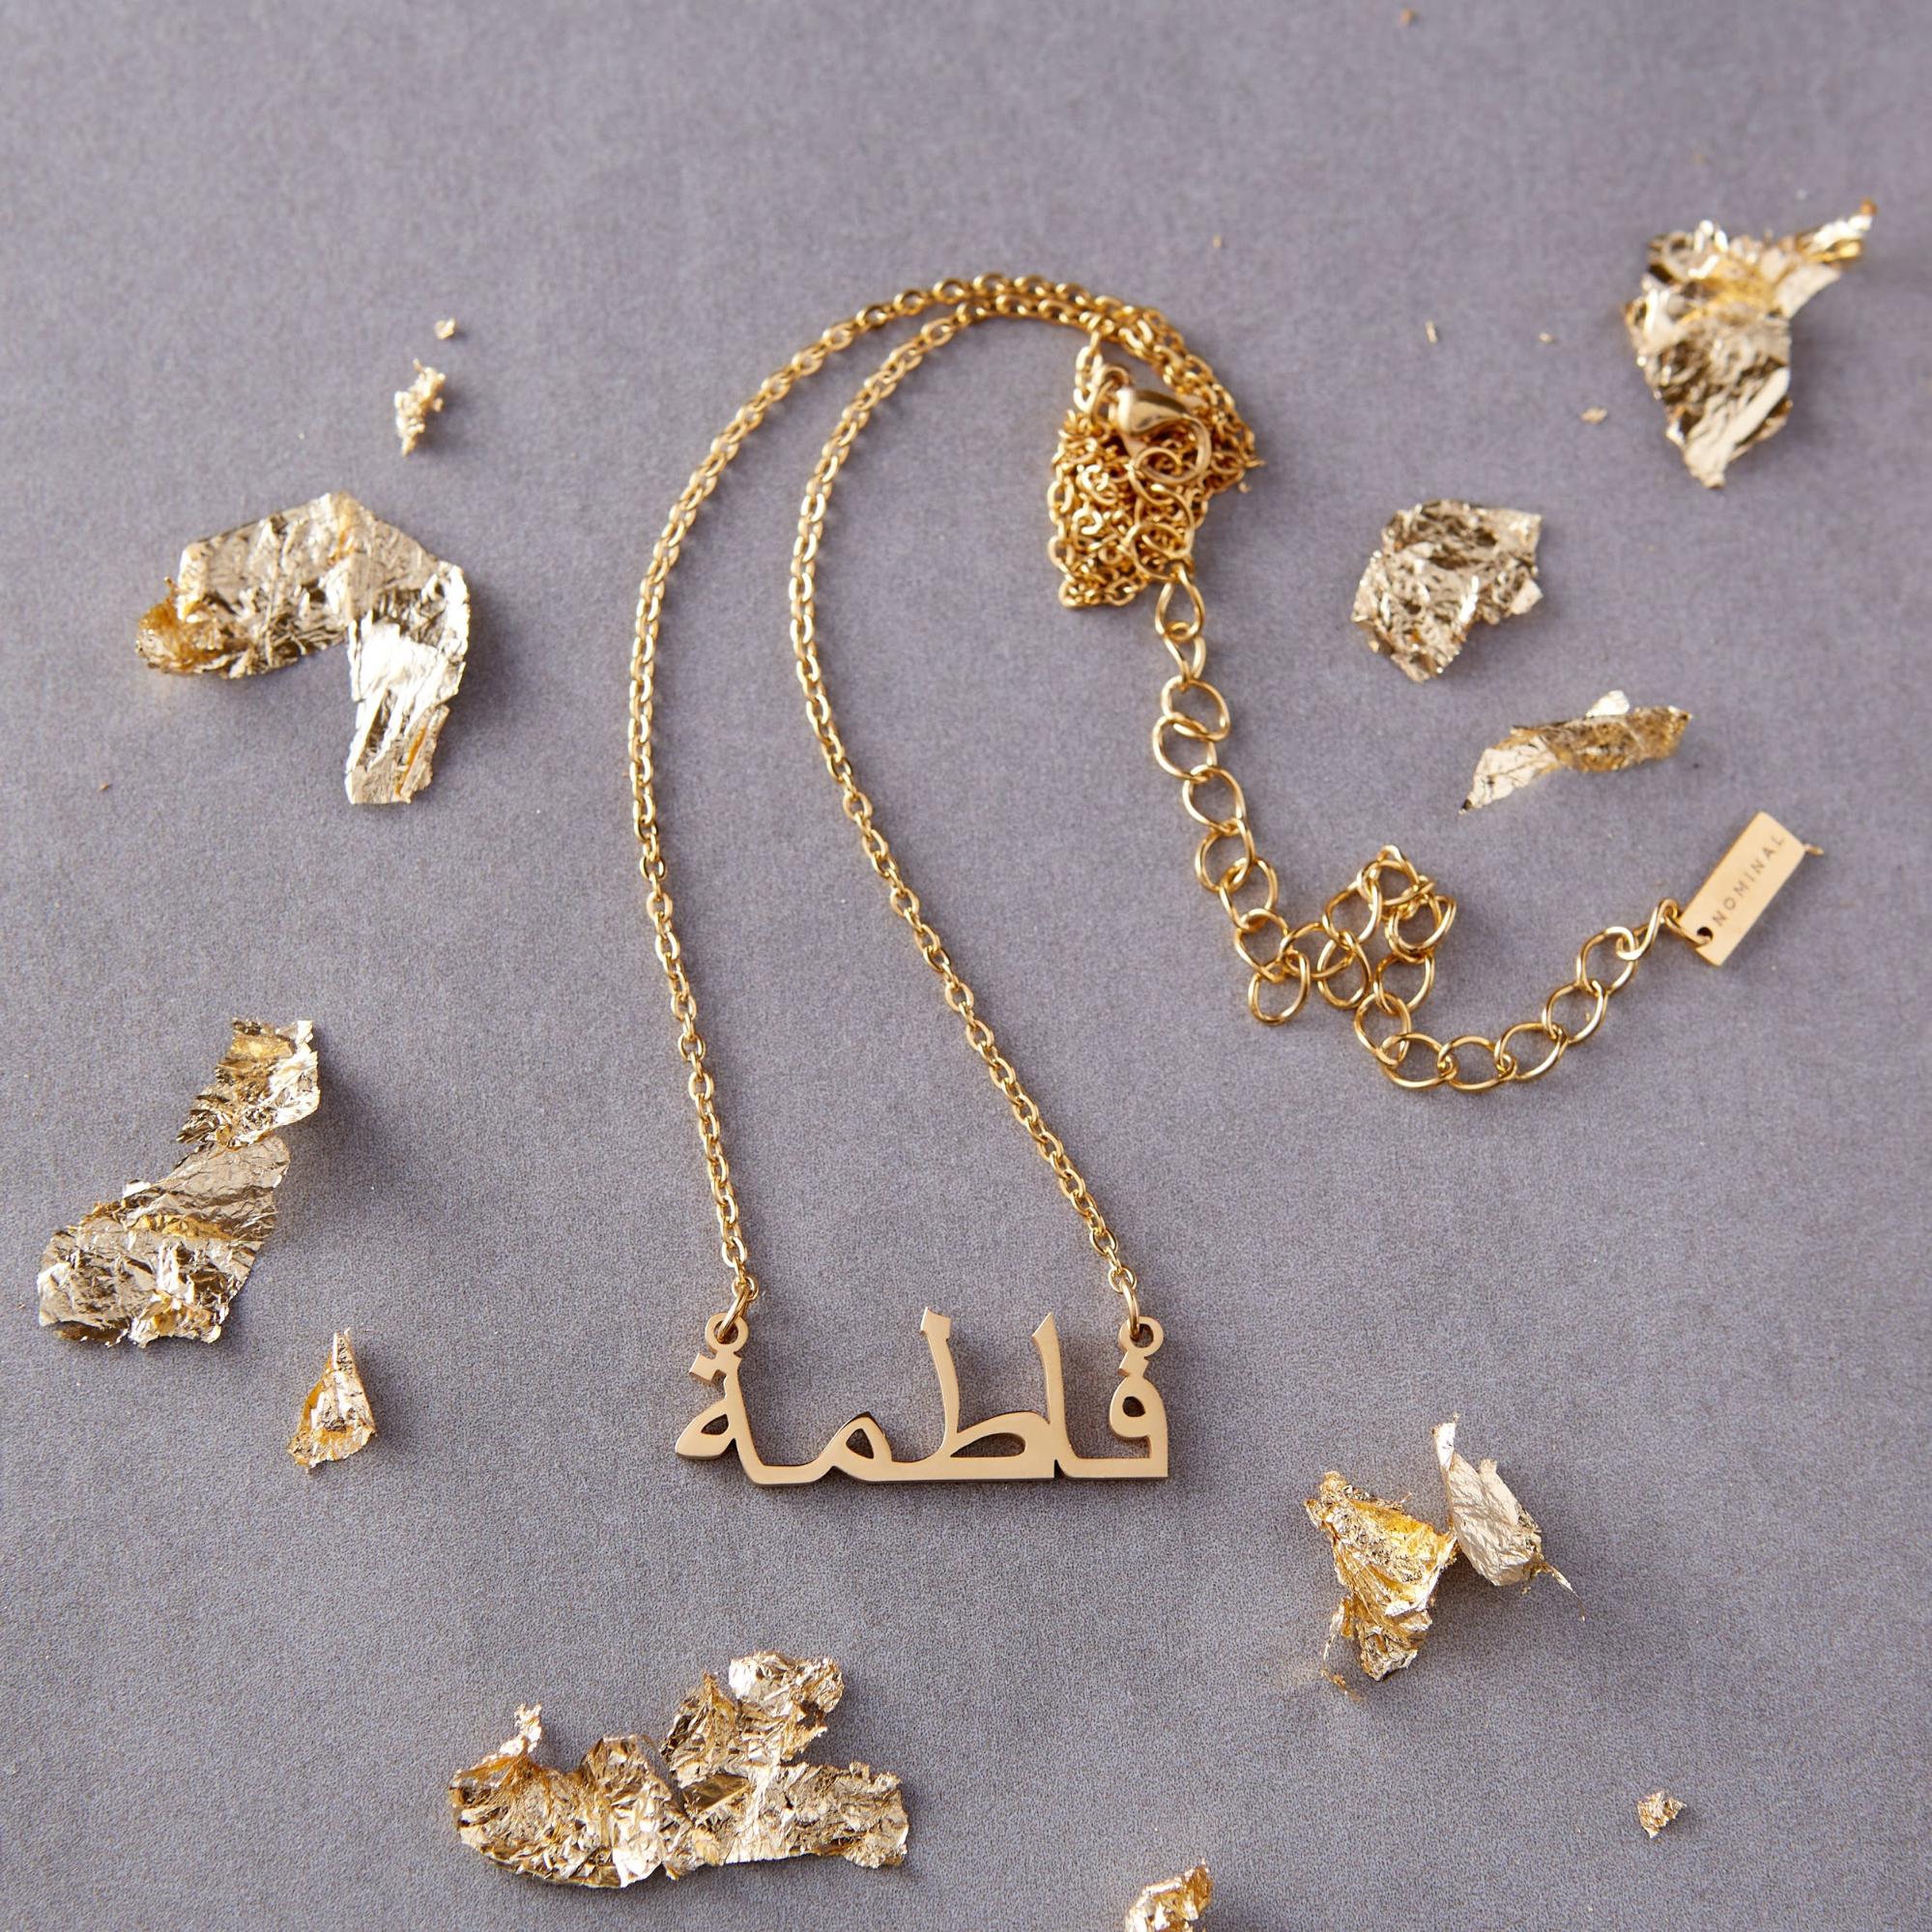 An array of golf foil pieces along with a necklace from Nominal.